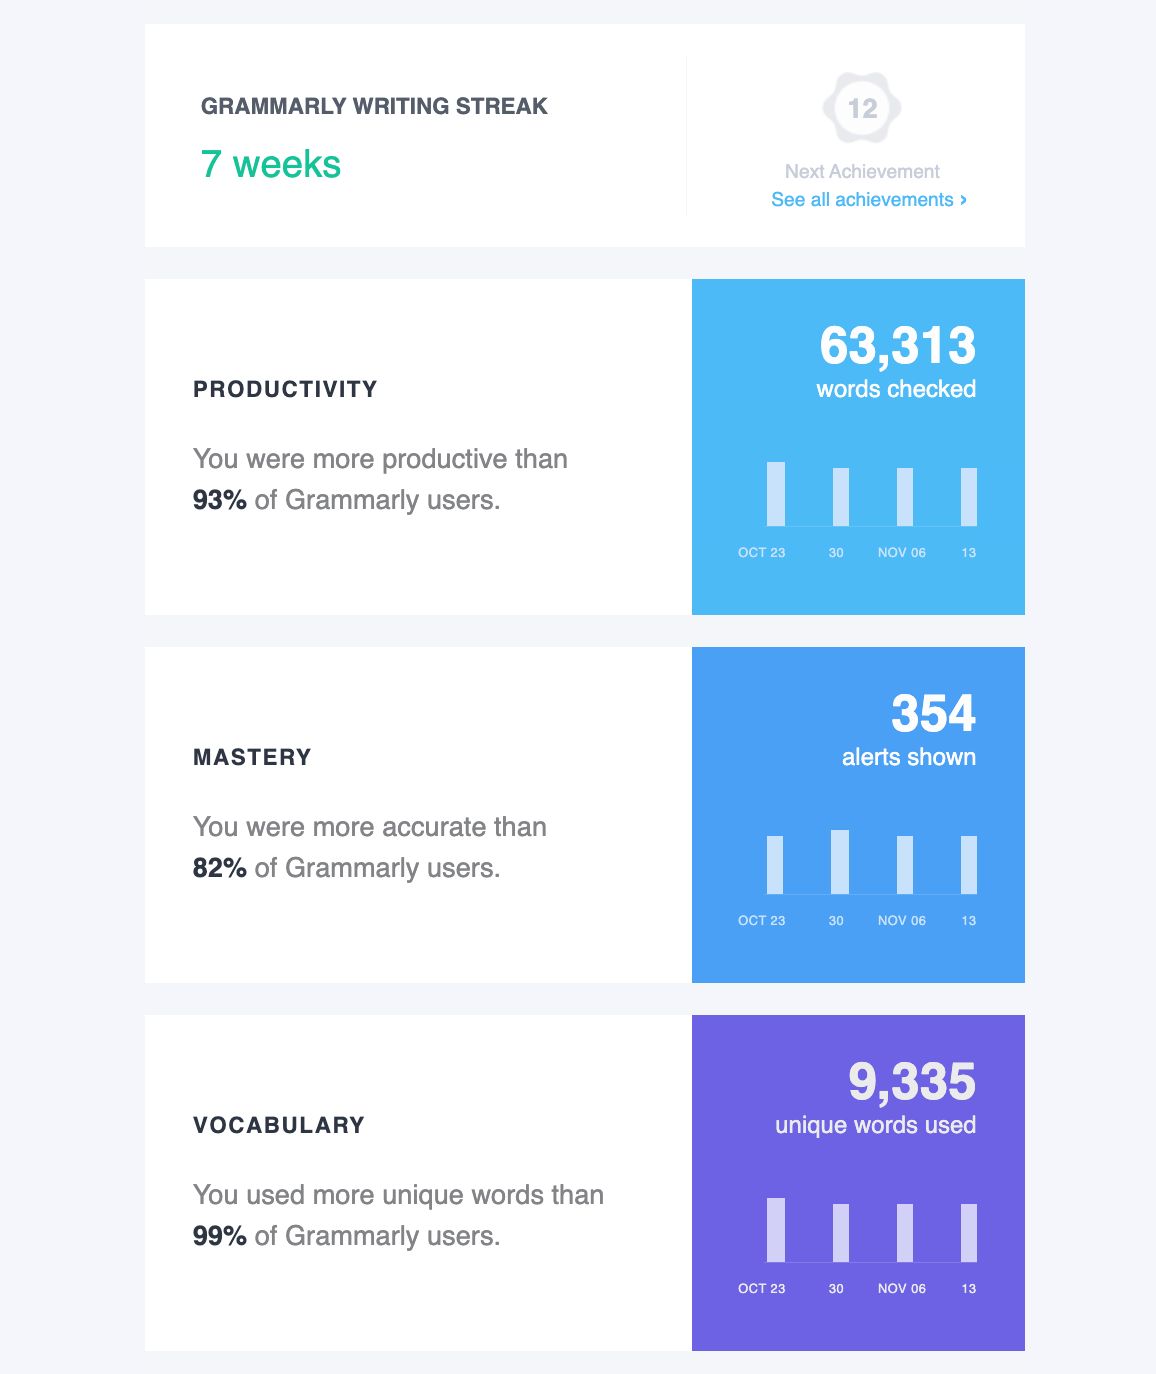 Lifecycle emails:: Milestone achievement email from Grammarly